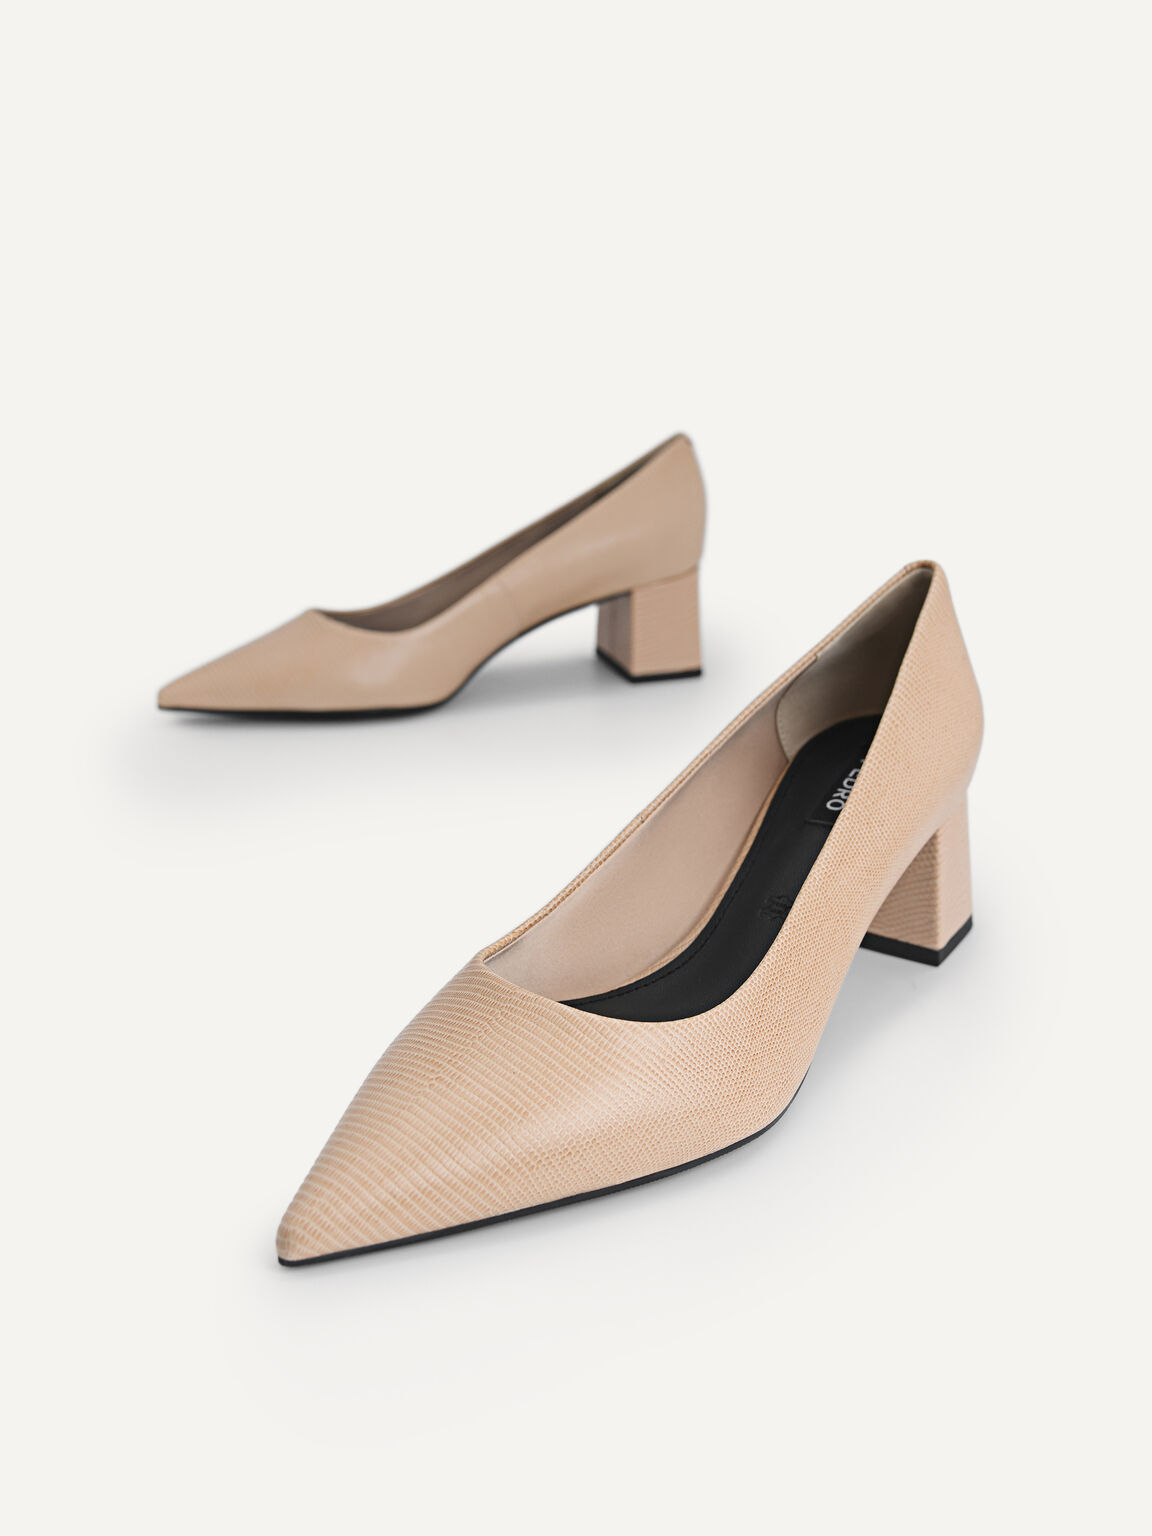 Lizard-Effect Leather Pointed Toe Pumps, Nude, hi-res